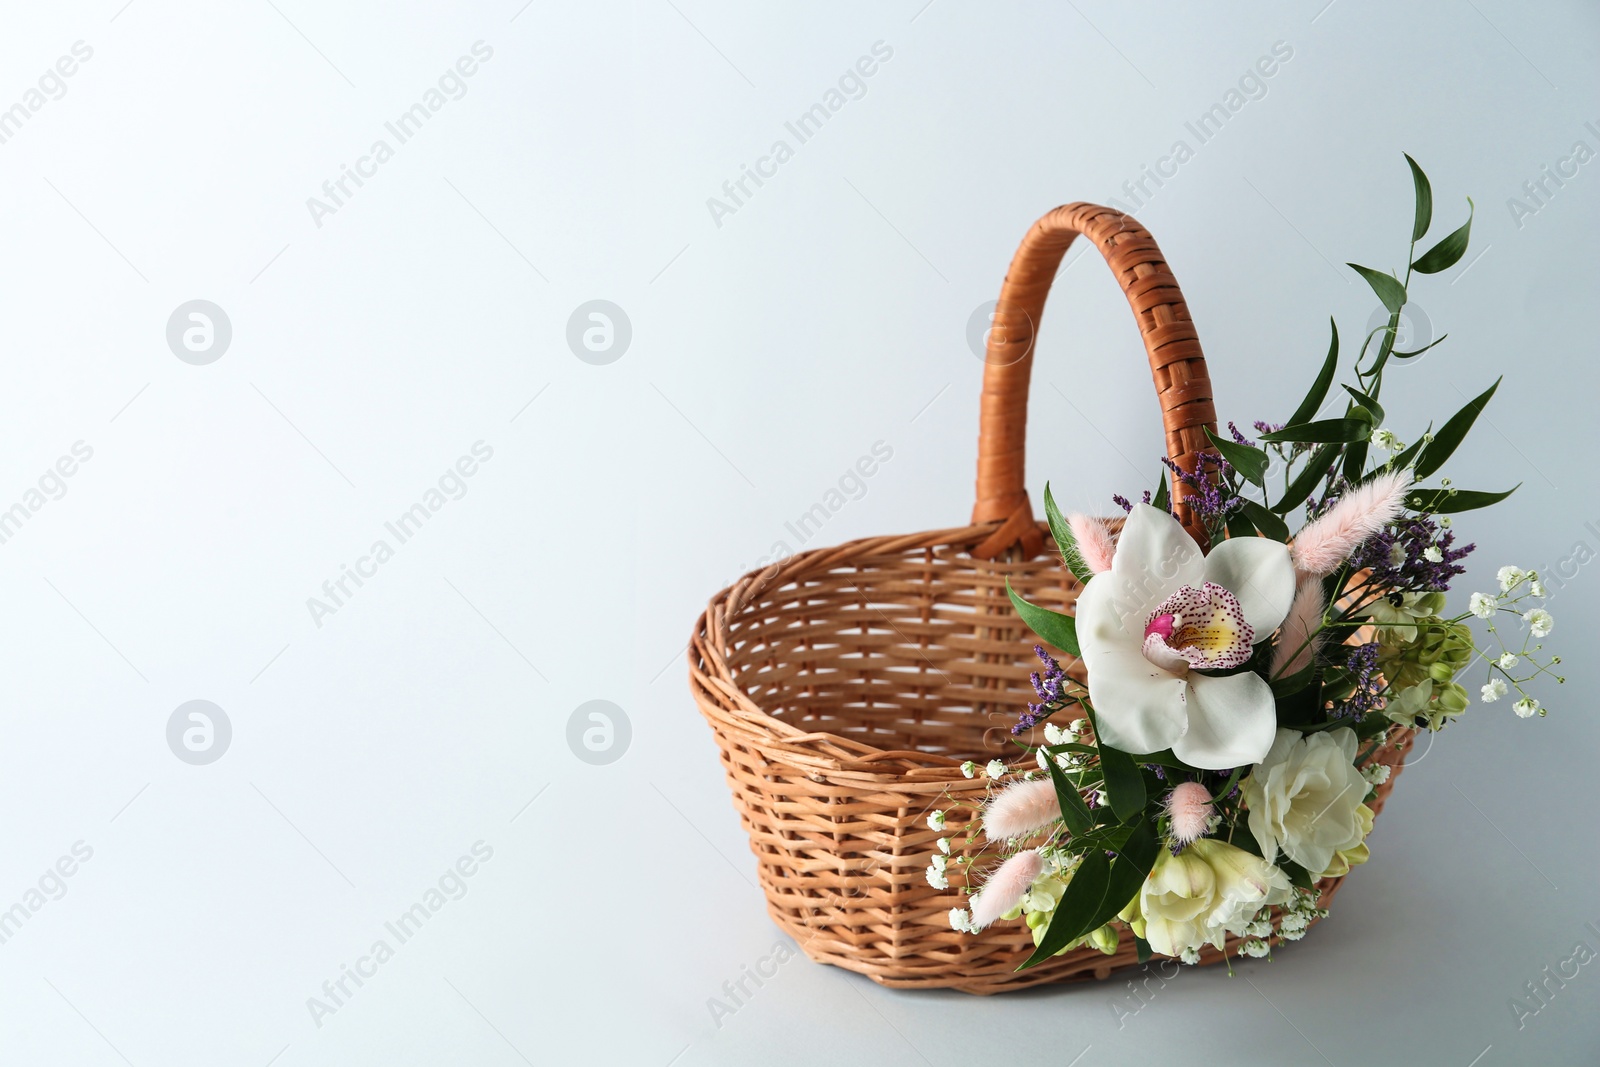 Photo of Wicker basket decorated with beautiful flowers on light background, space for text. Easter item